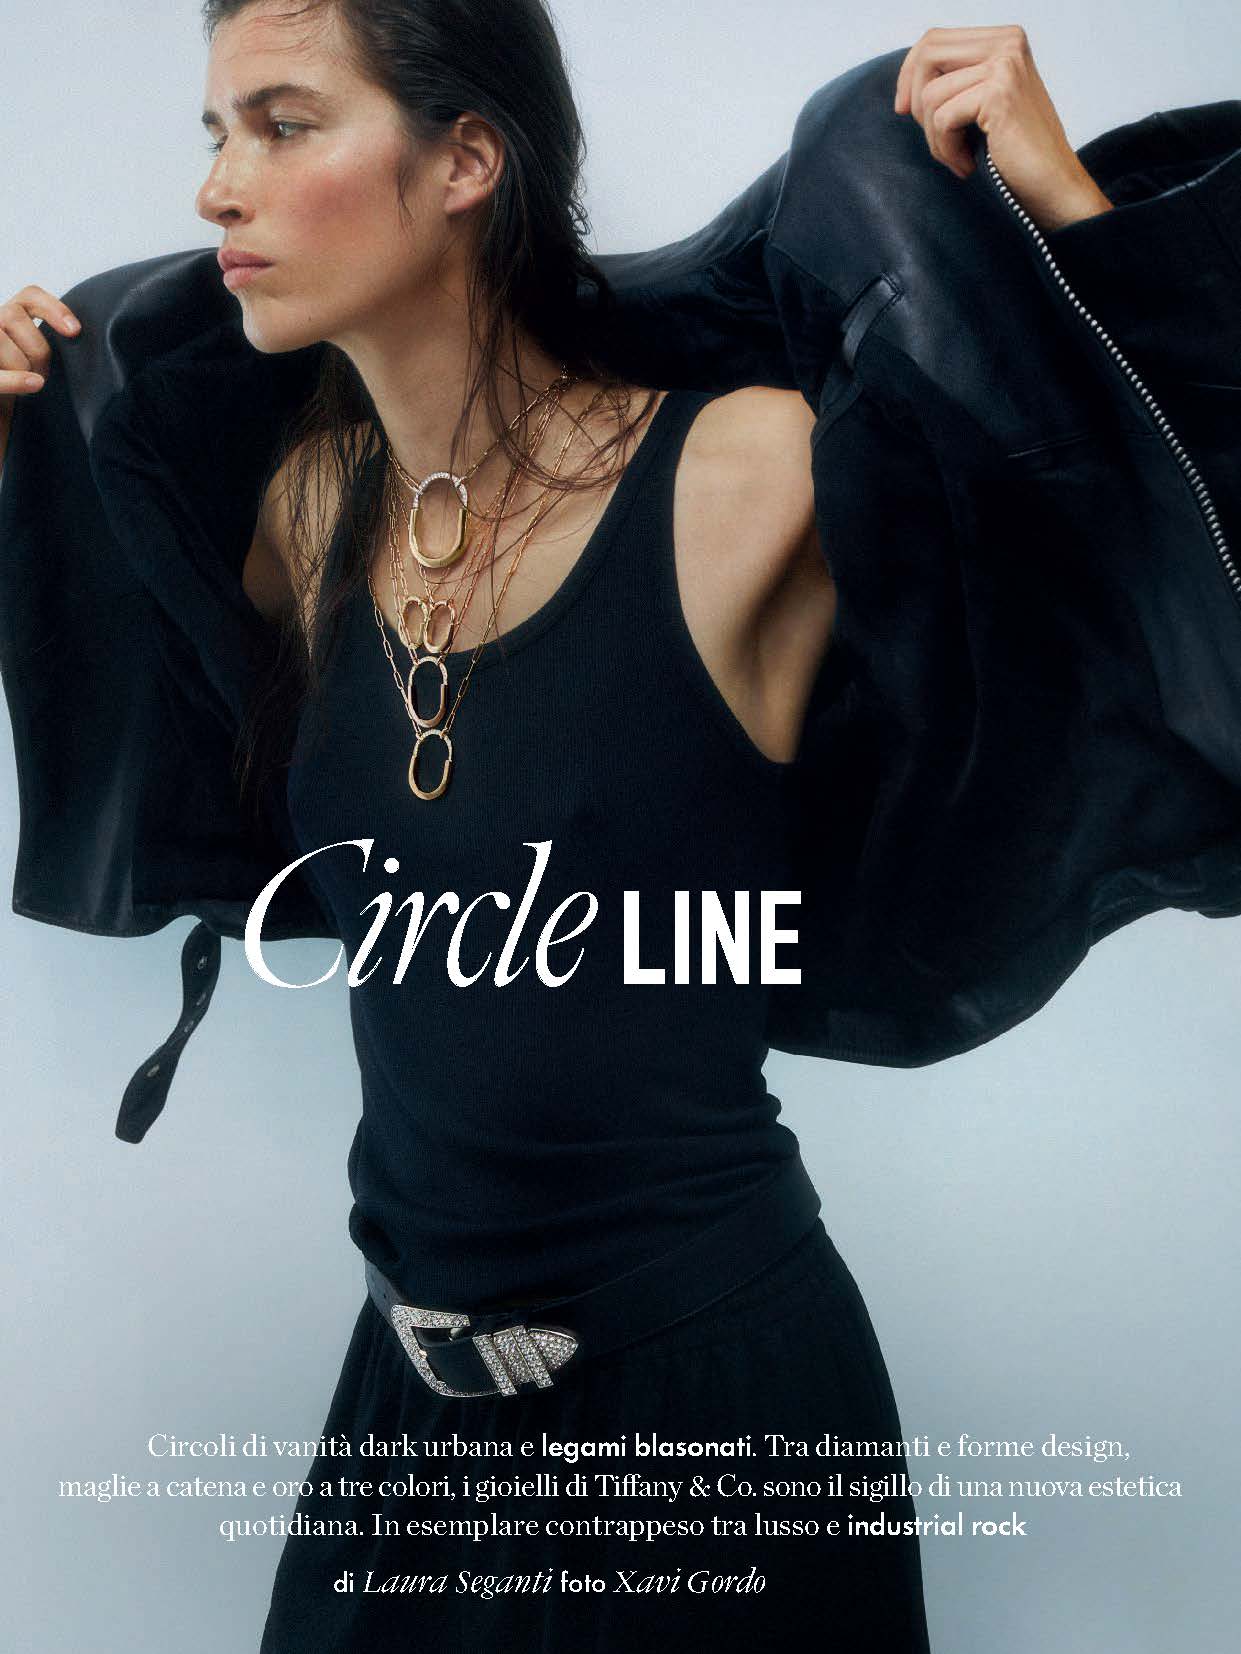 CoqCreative power by ProductionLink s.r.l. Elle Magazine - Circle Line Elle-Magazine---Circle-Line  Elle Magazine - Circle Line